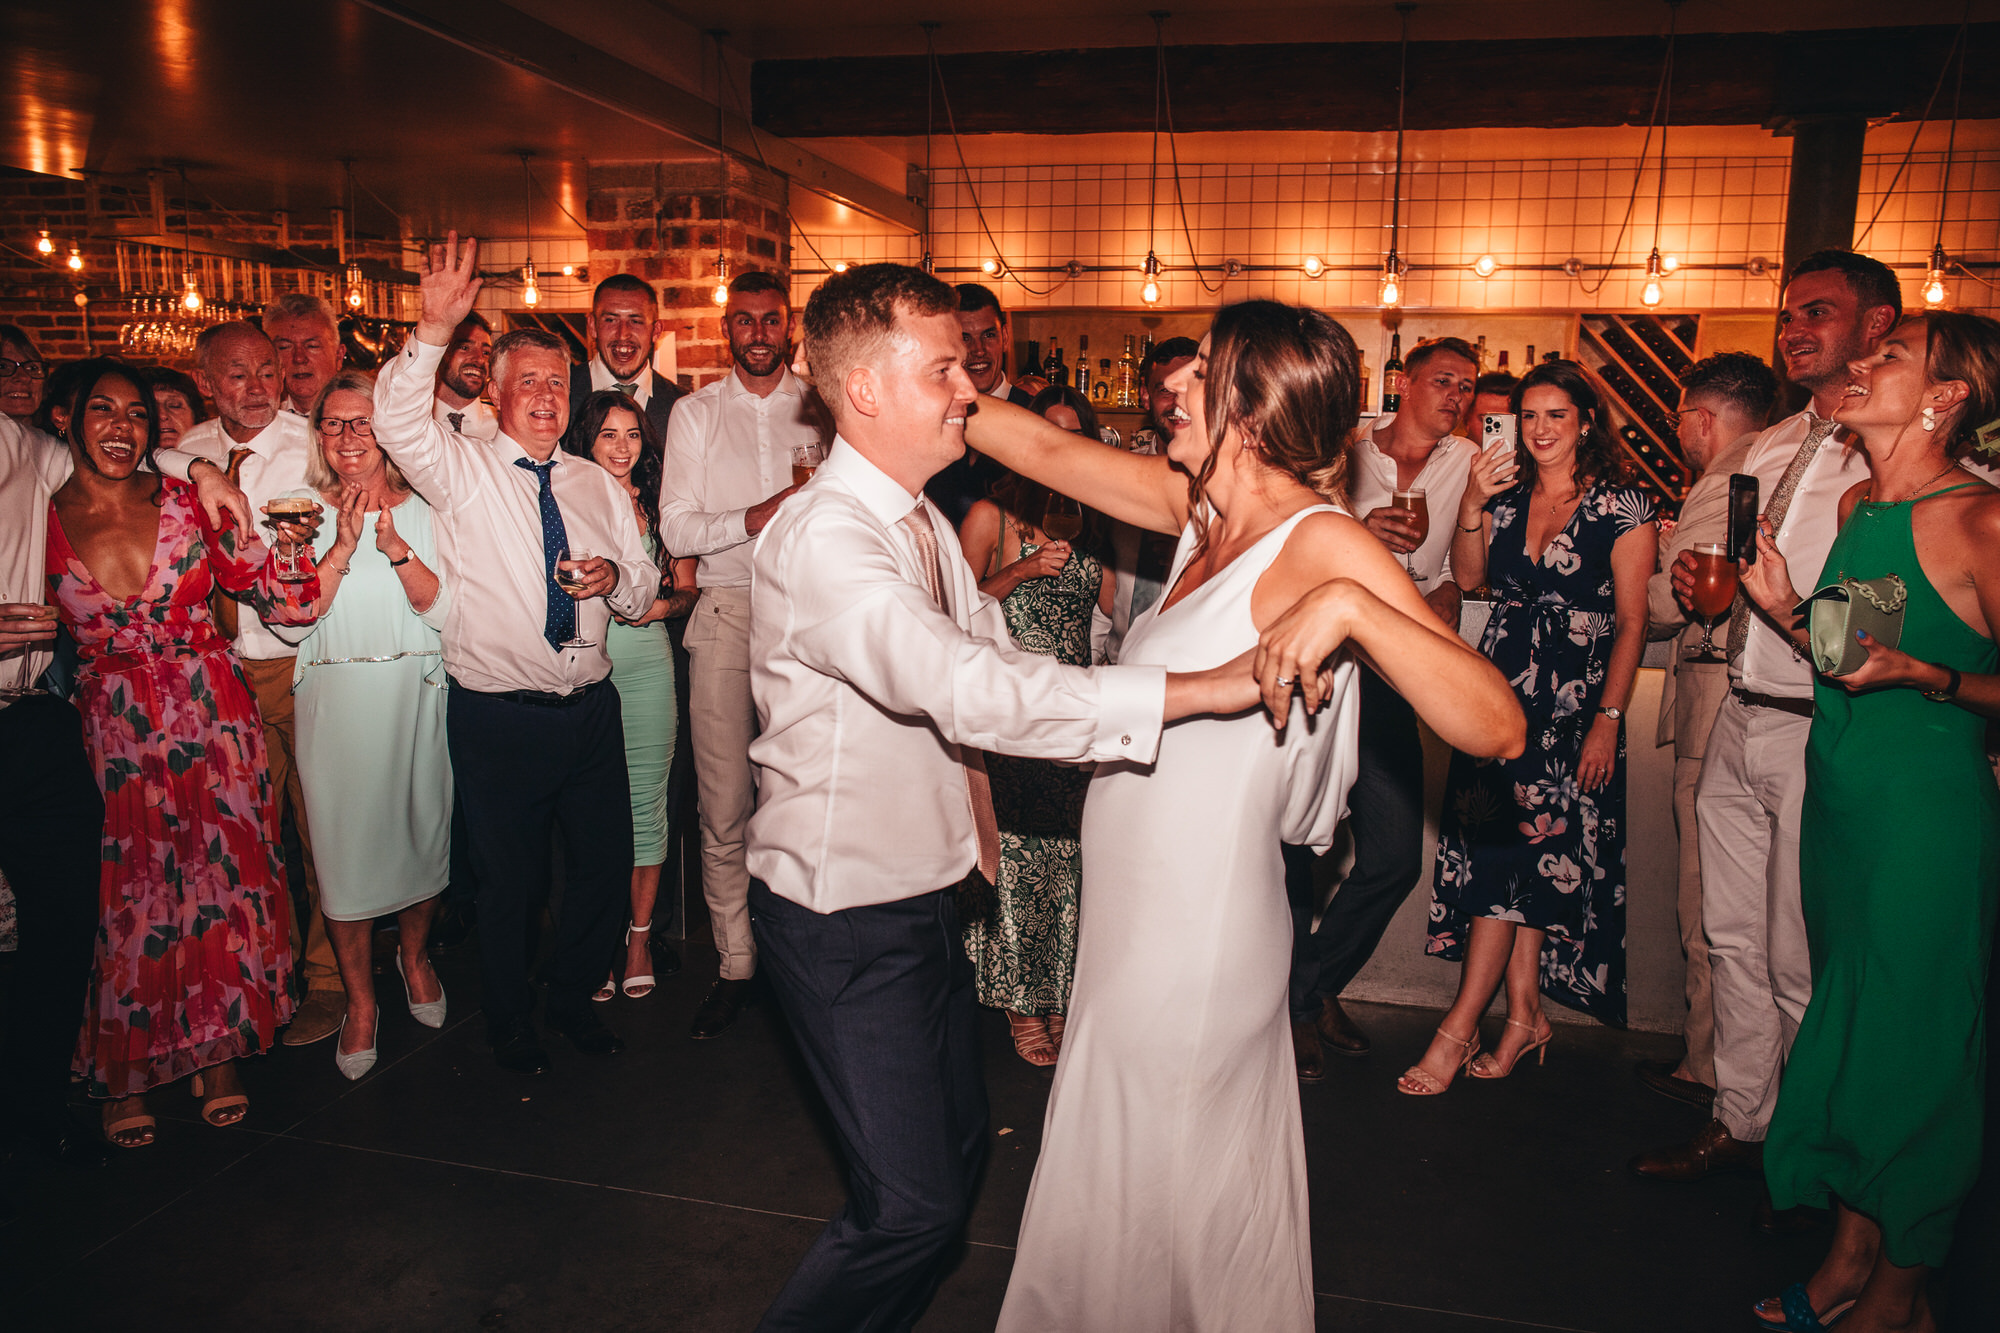 bride and groom dancing together on dancefloor for first dance with crowd of guests watching